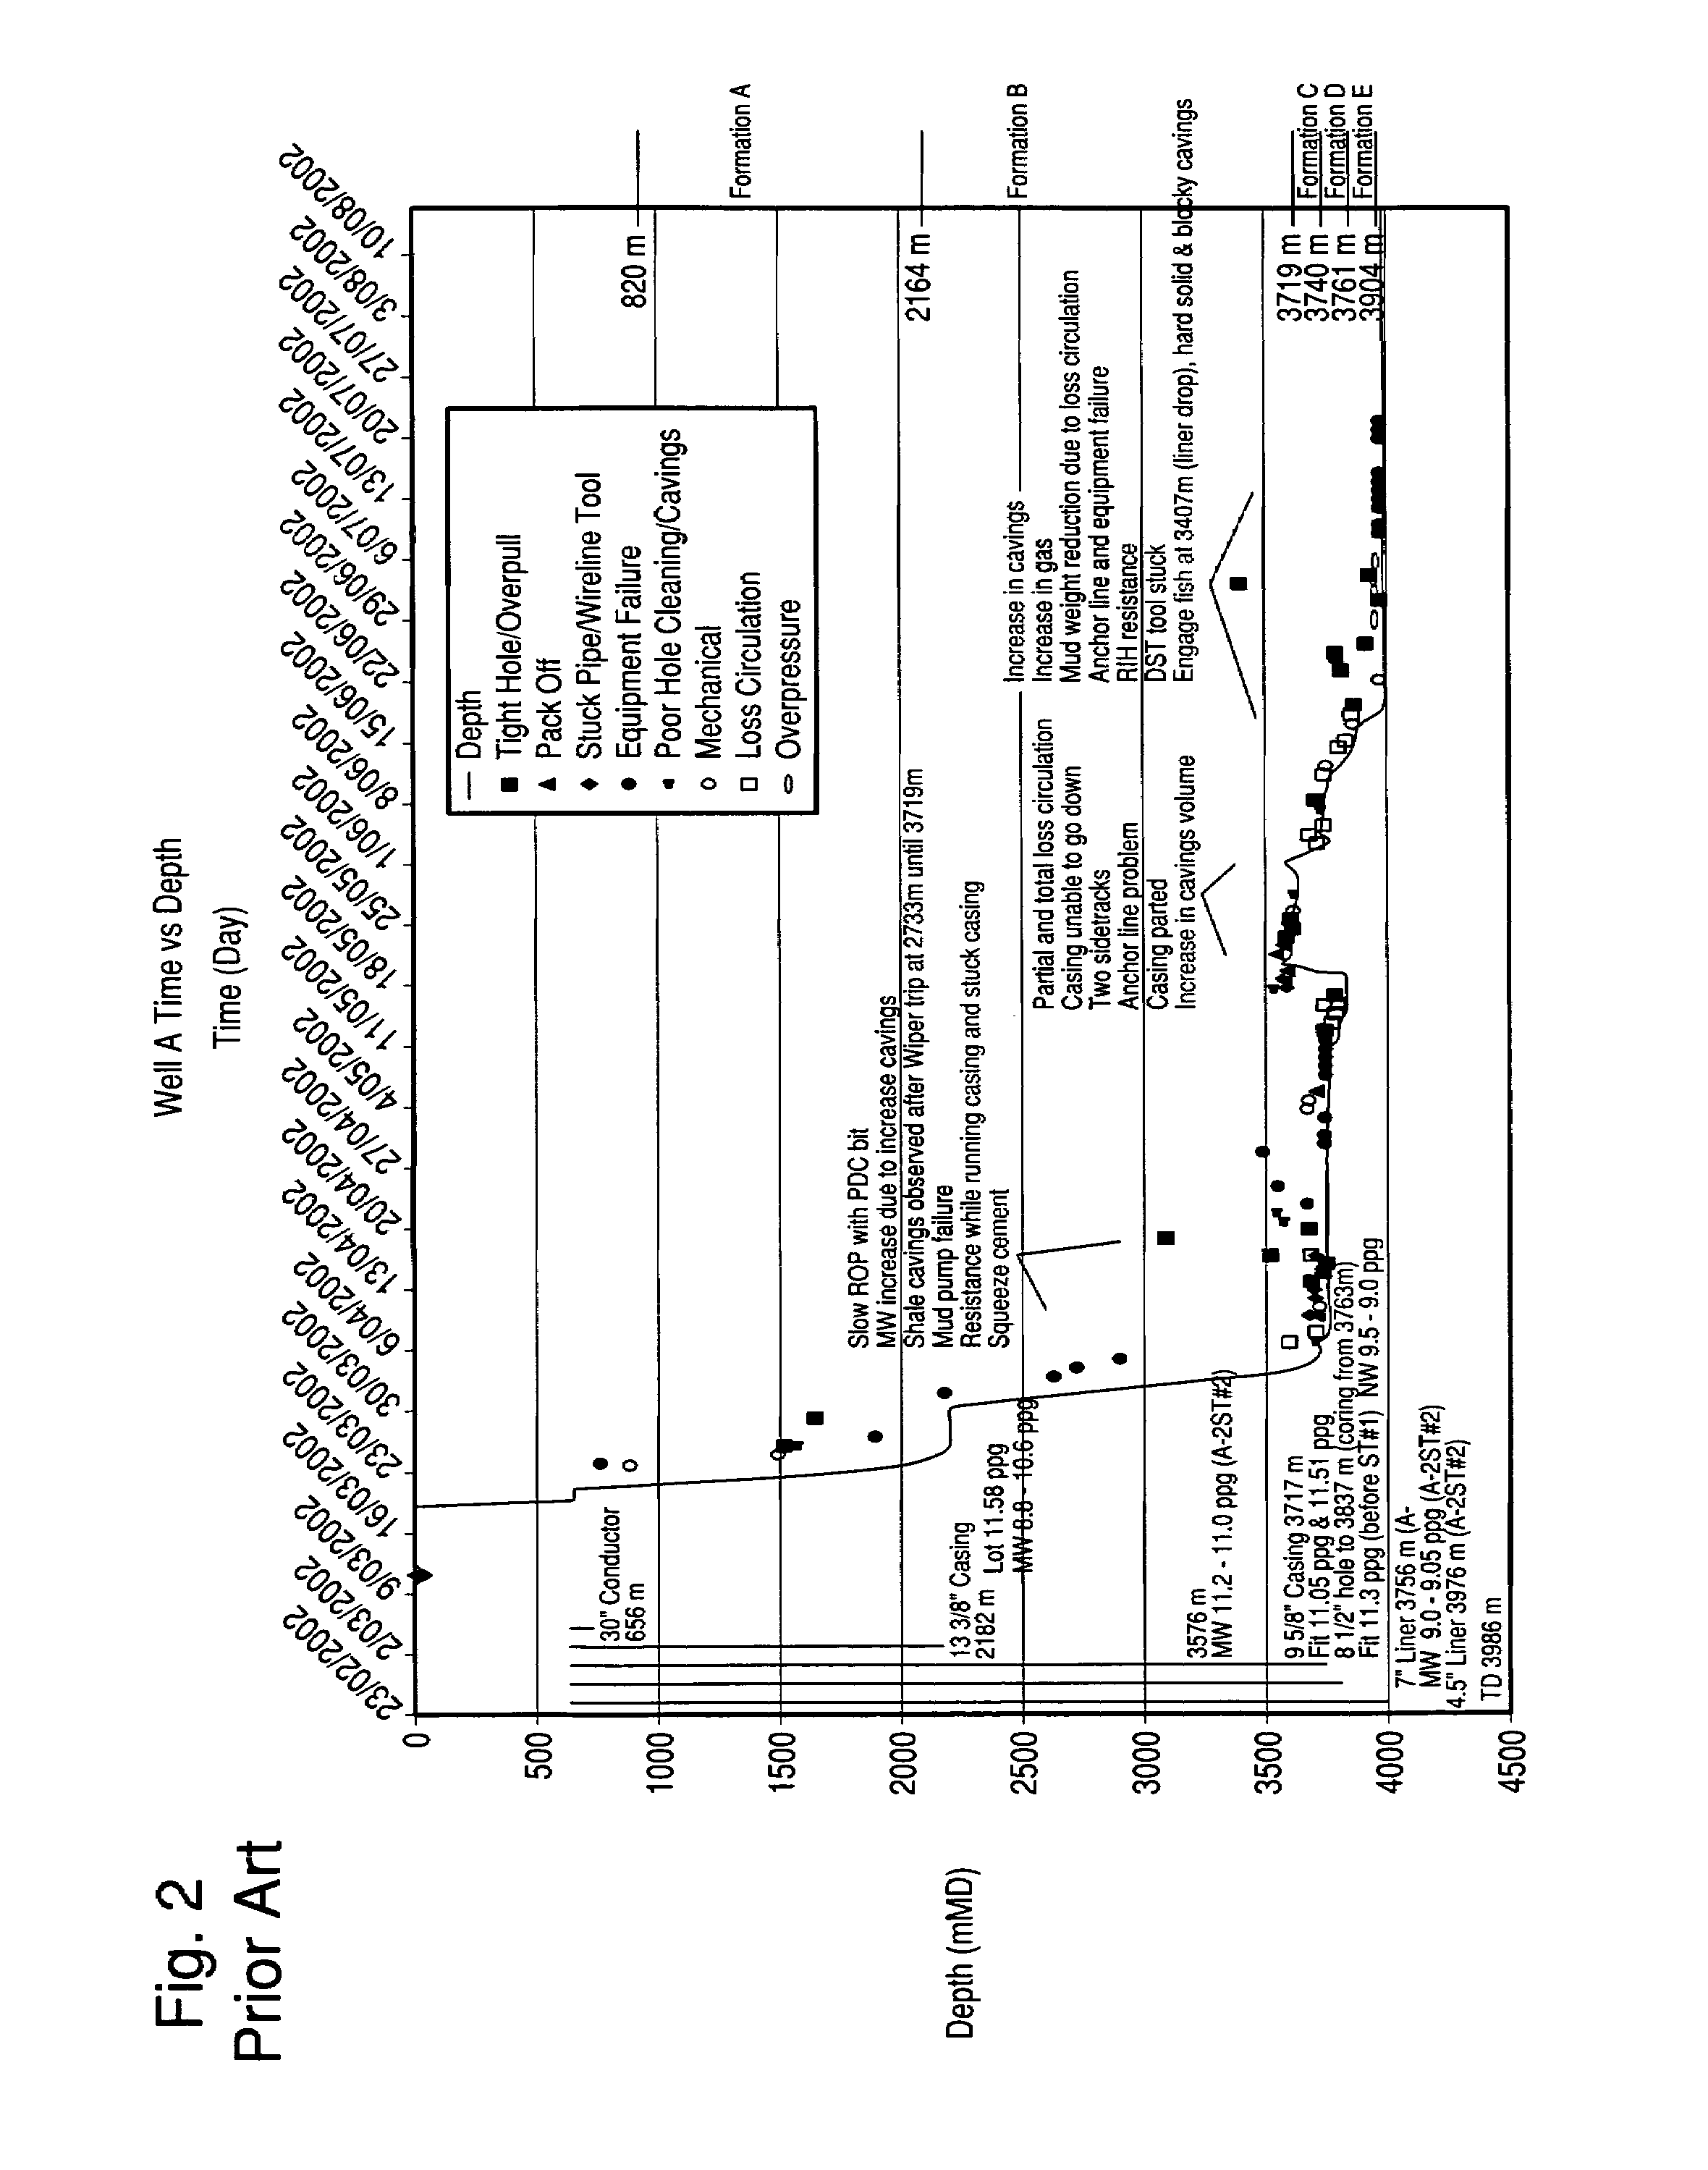 Method and computer program product for drilling mud design optimization to maintain time-dependent stability of argillaceous formations